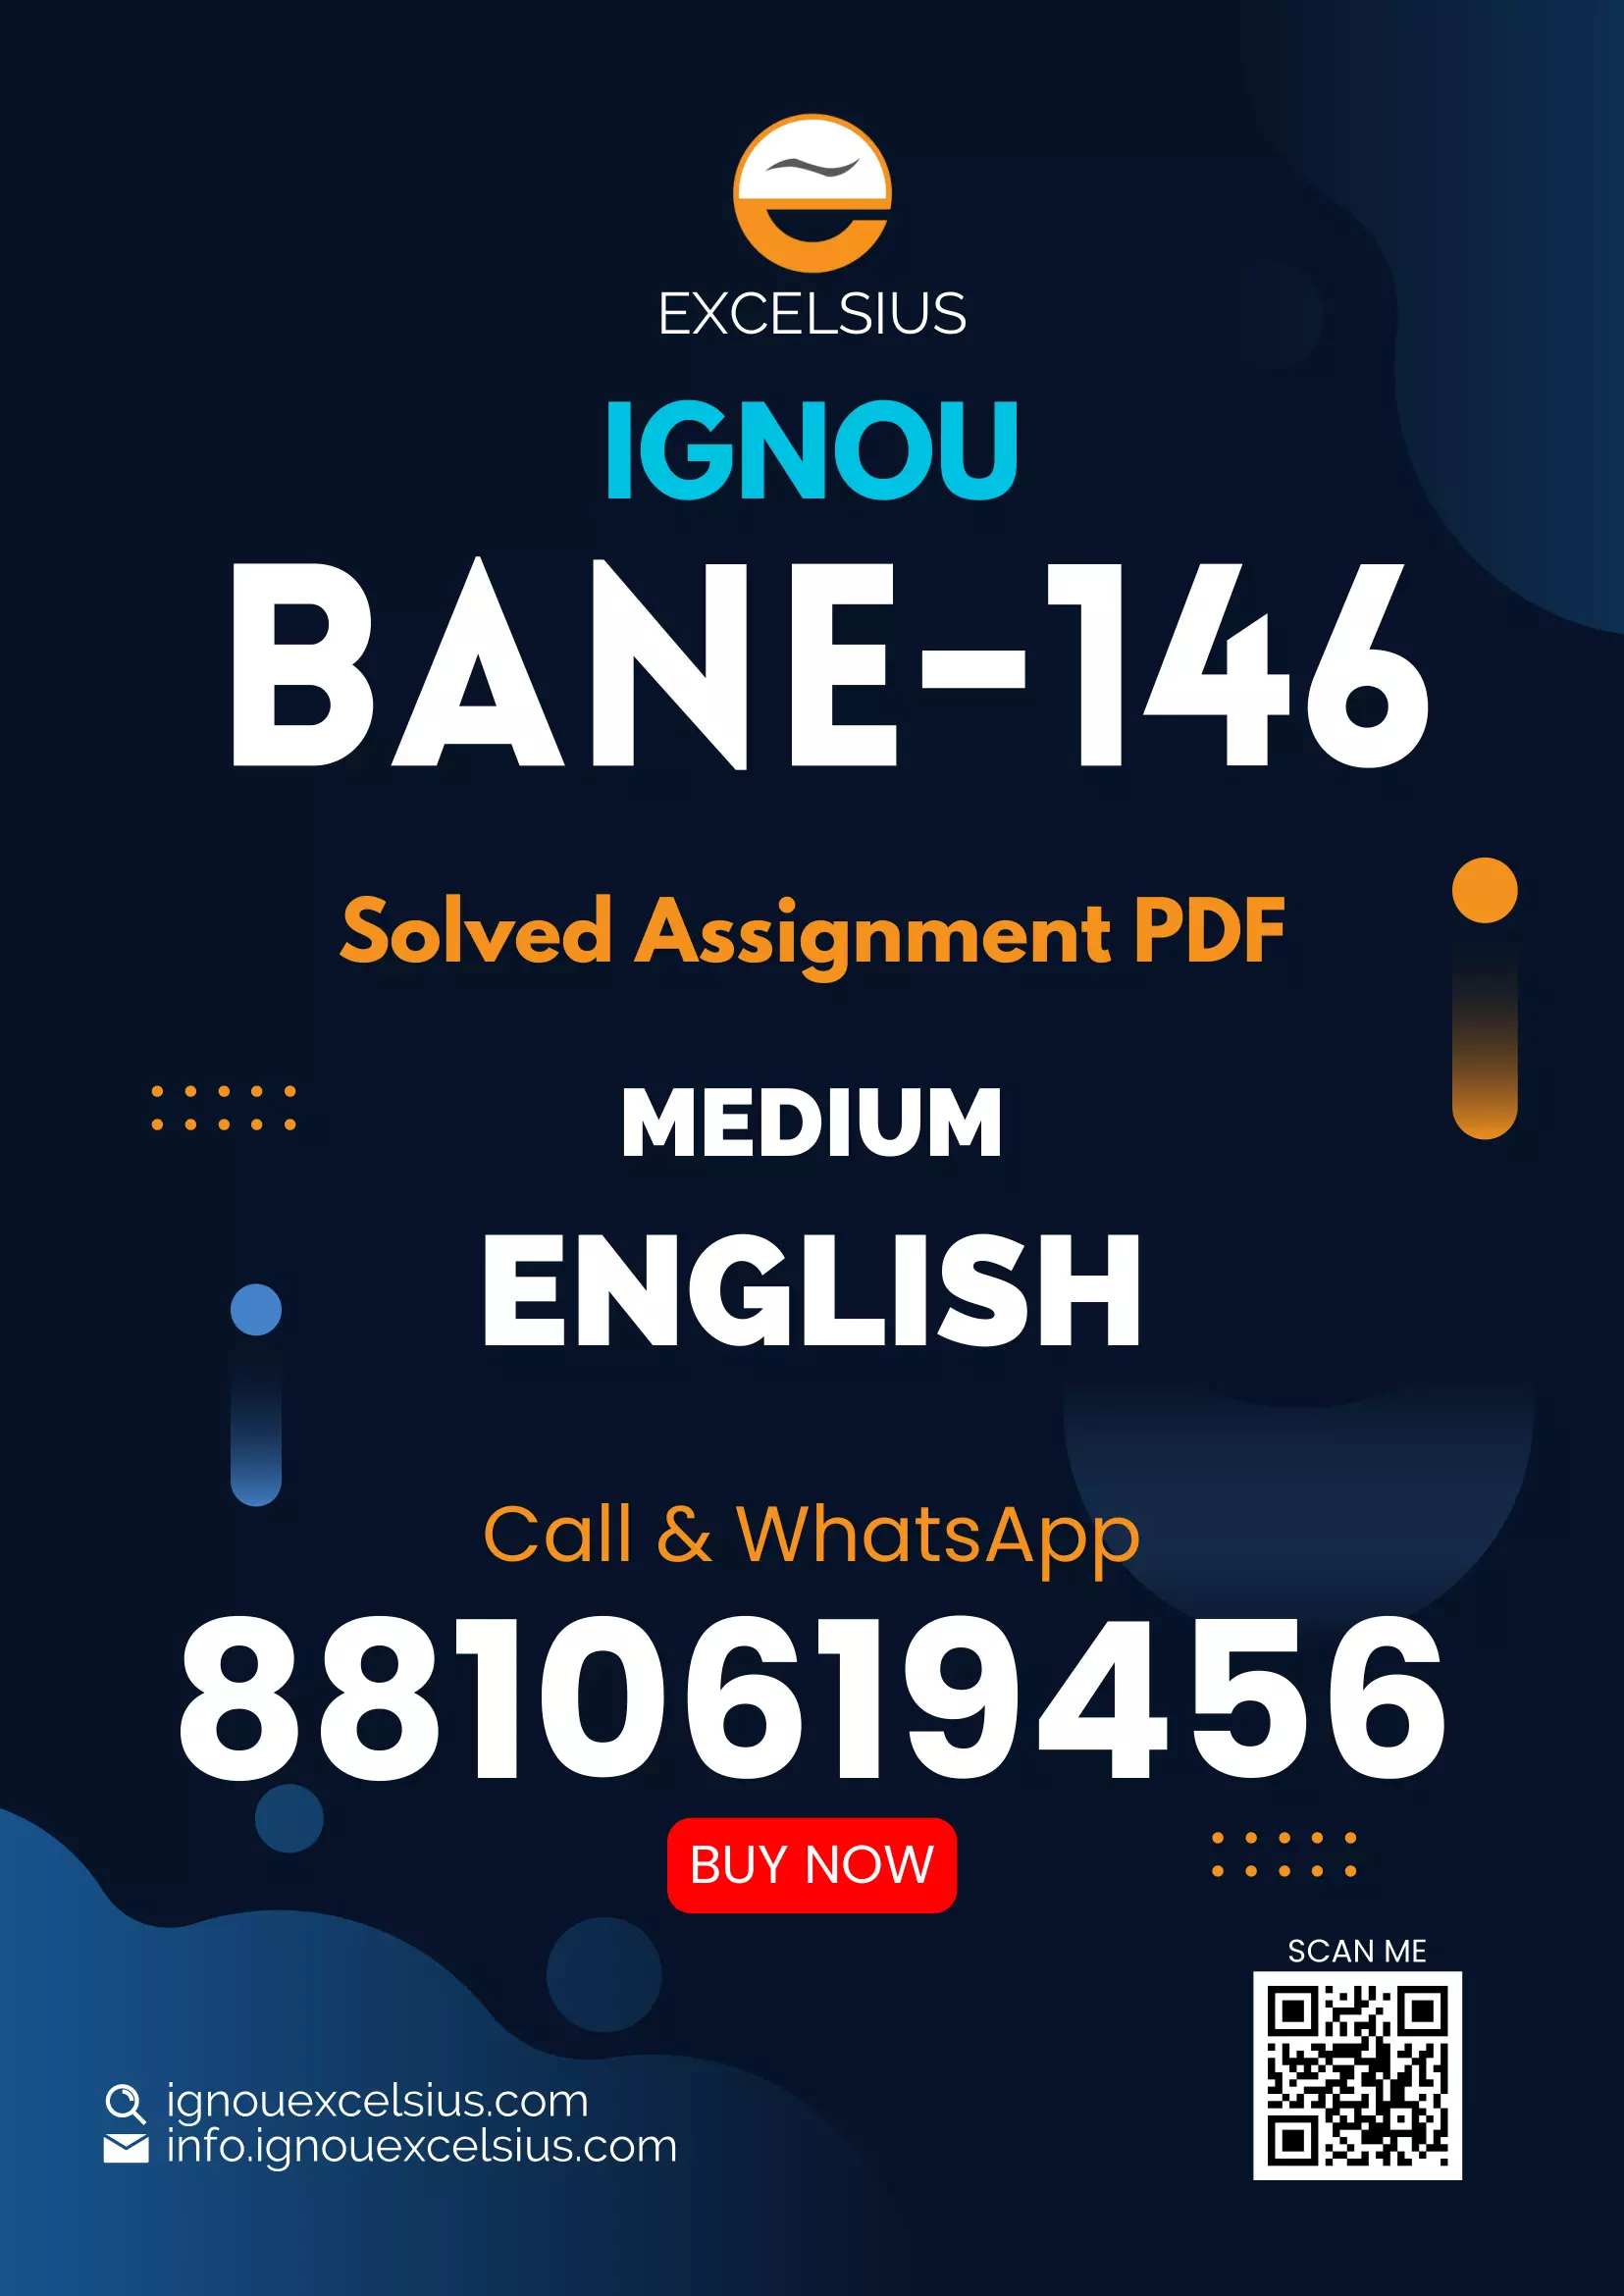 IGNOU BANE-146 - Anthropology of Indigenous People, Latest Solved Assignment-July 2022 – January 2023